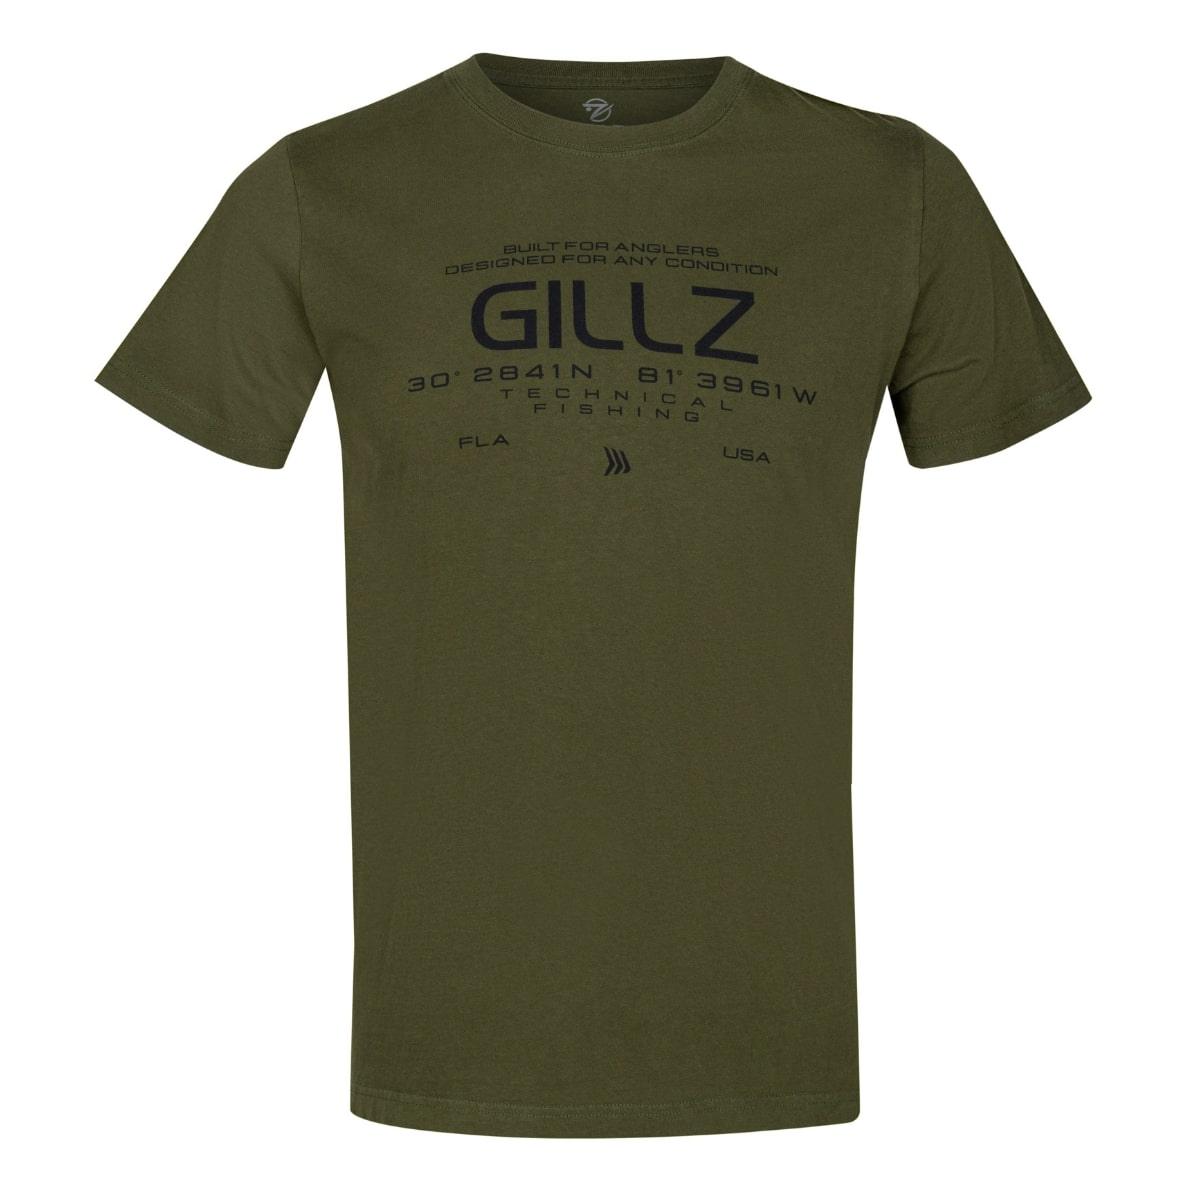 Contender Series SS Graphic Tee - Gillz